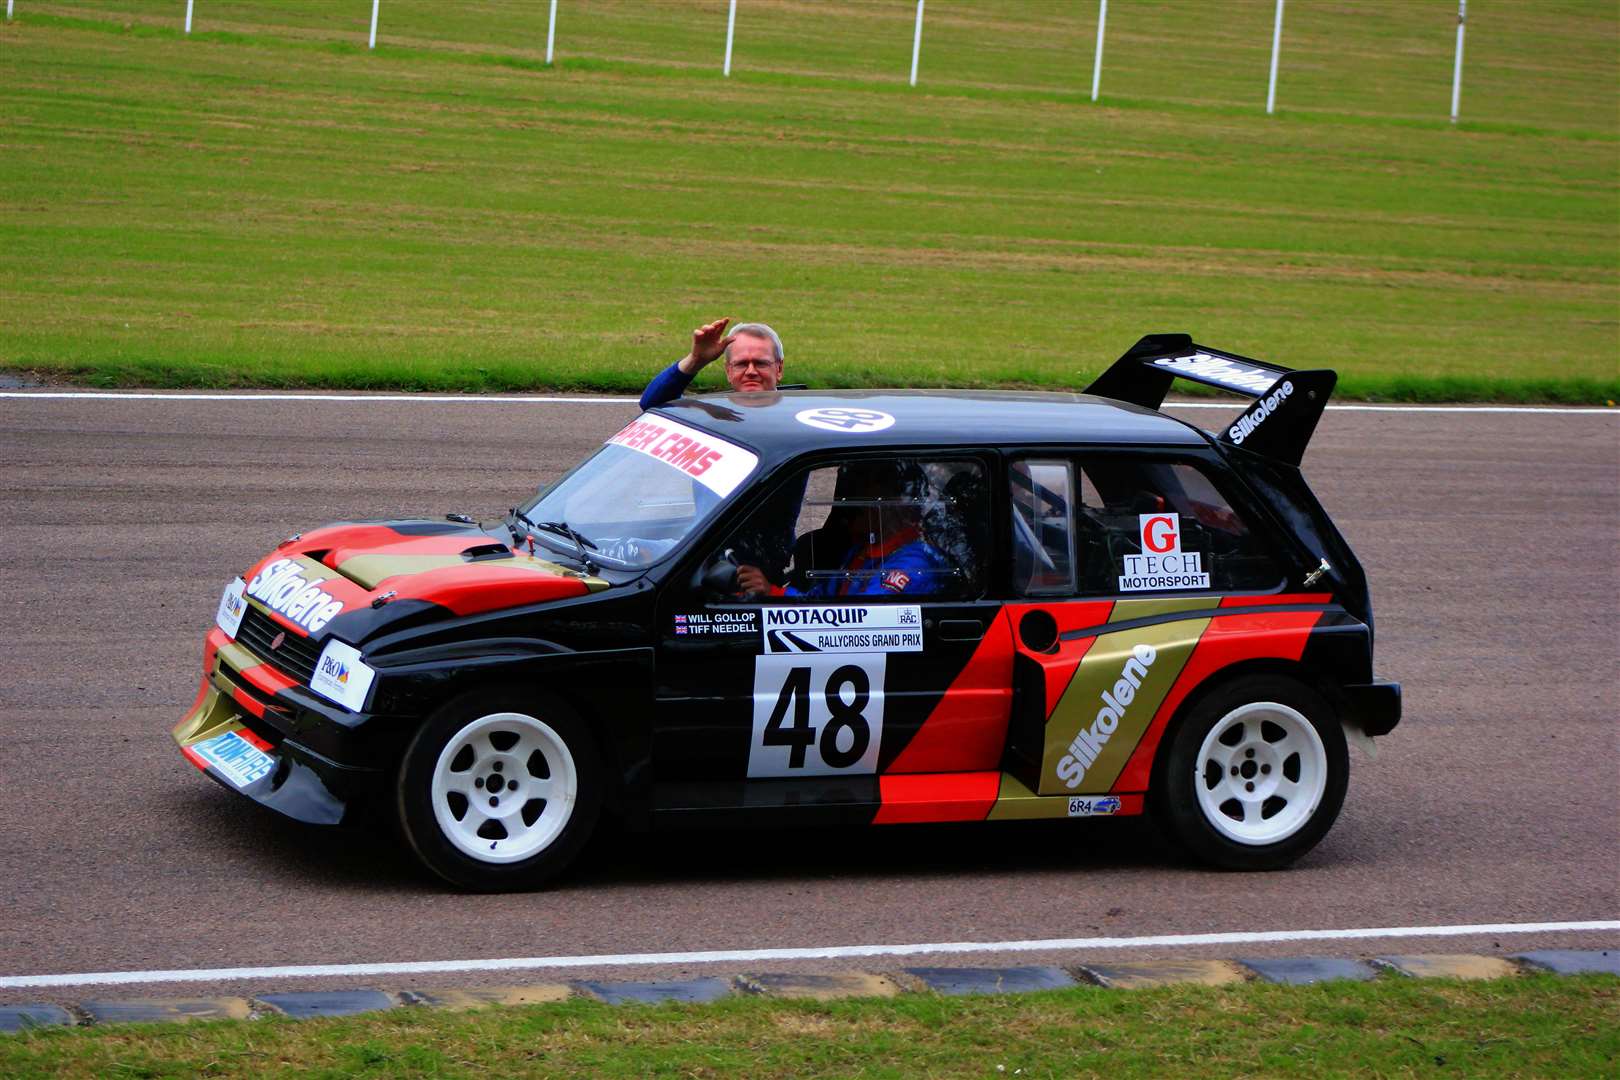 Rallycross legend Will Gollop paraded a MG Metro 6R4. Picture: Joe Wright